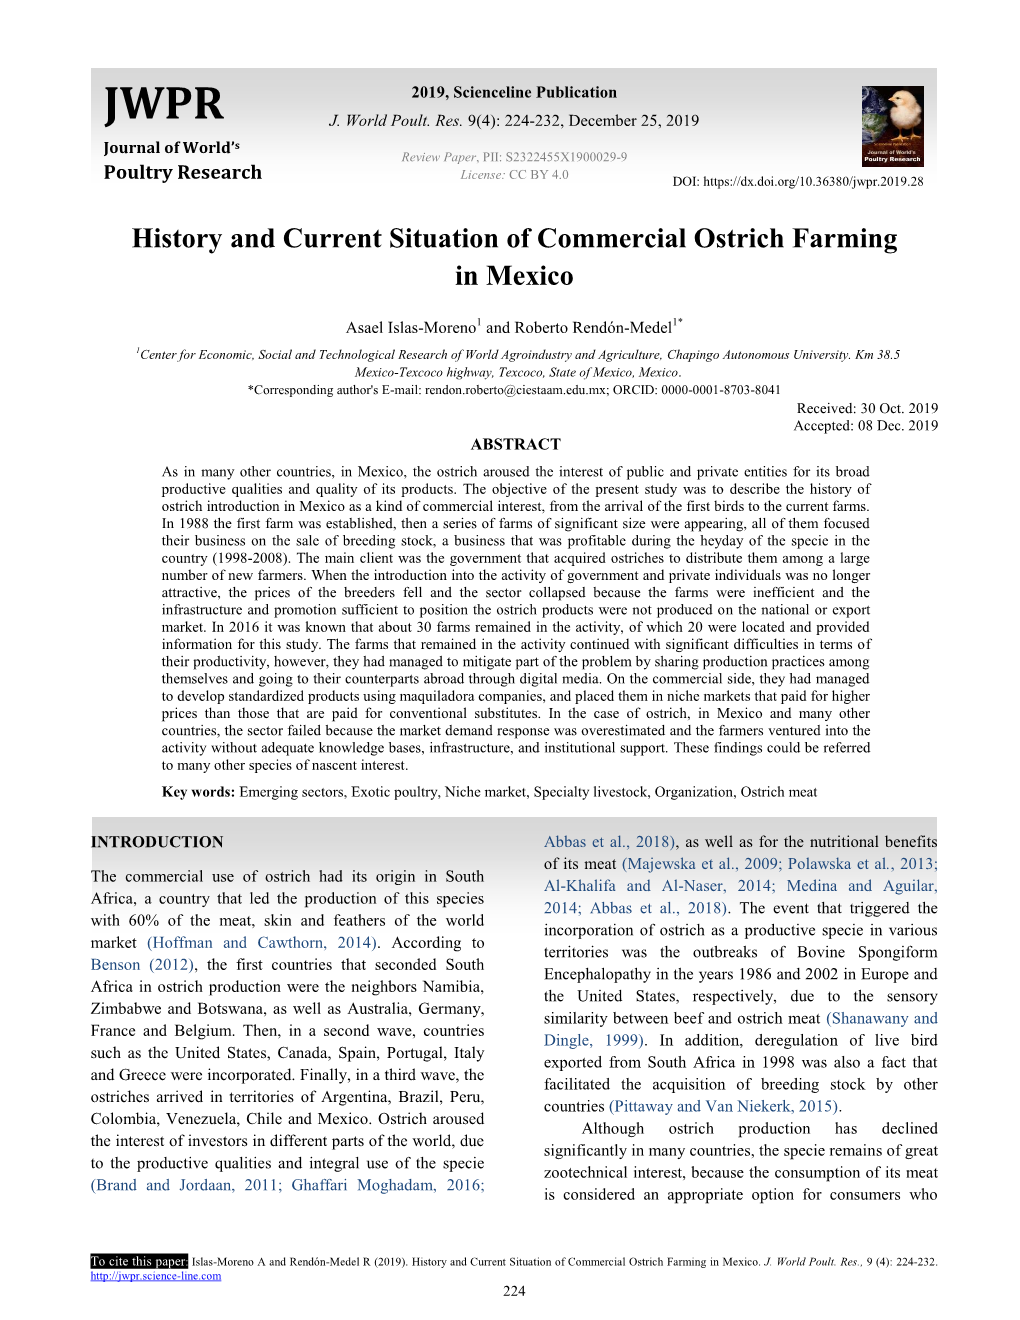 History and Current Situation of Commercial Ostrich Farming in Mexico